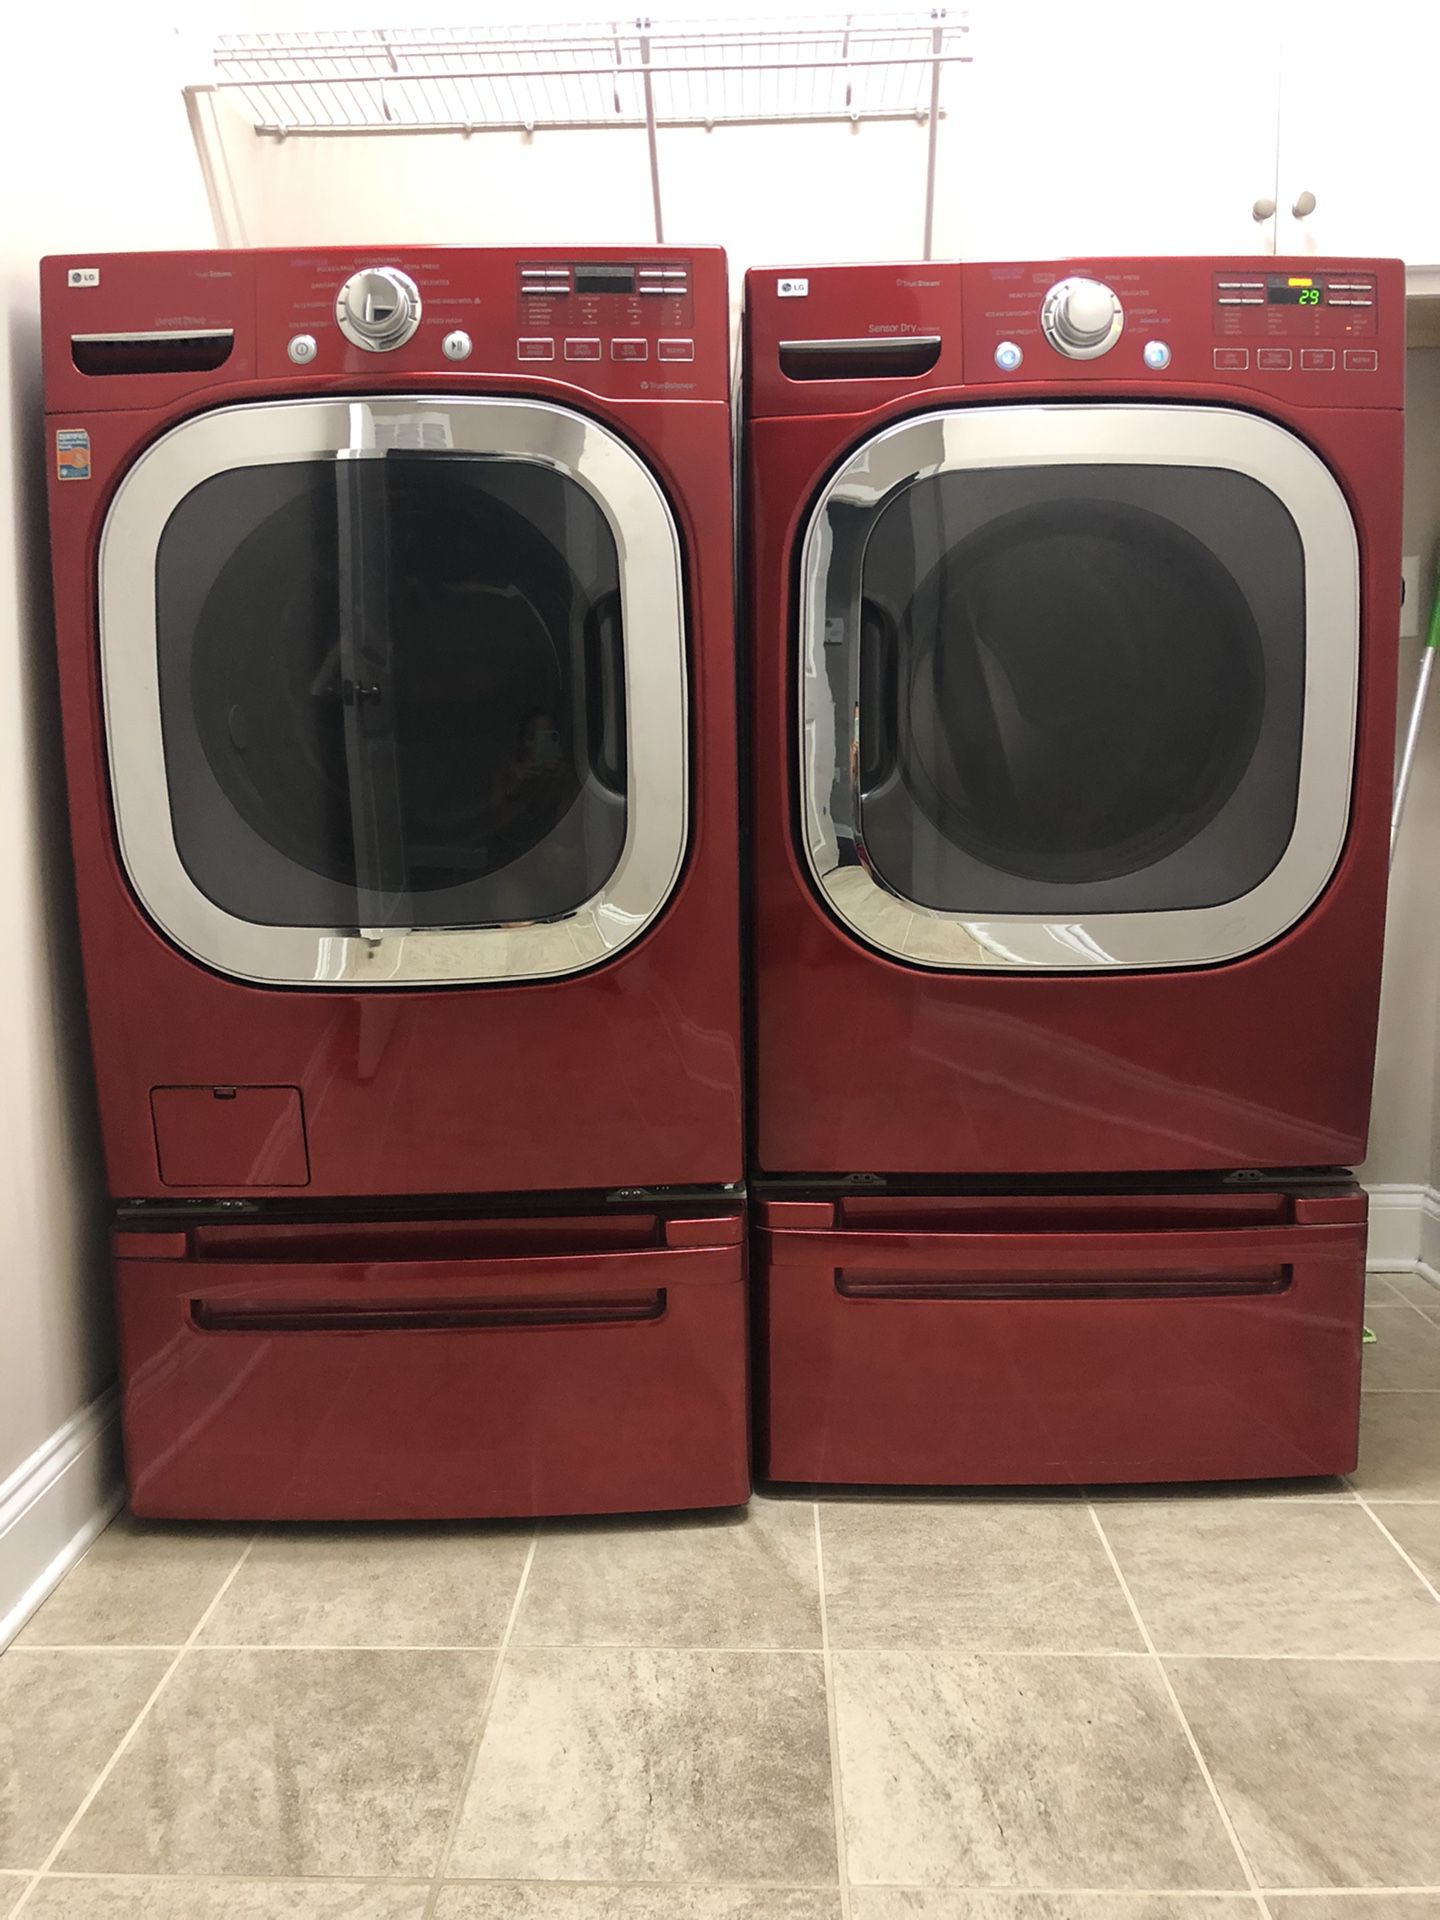 LG Washer and Dryer set